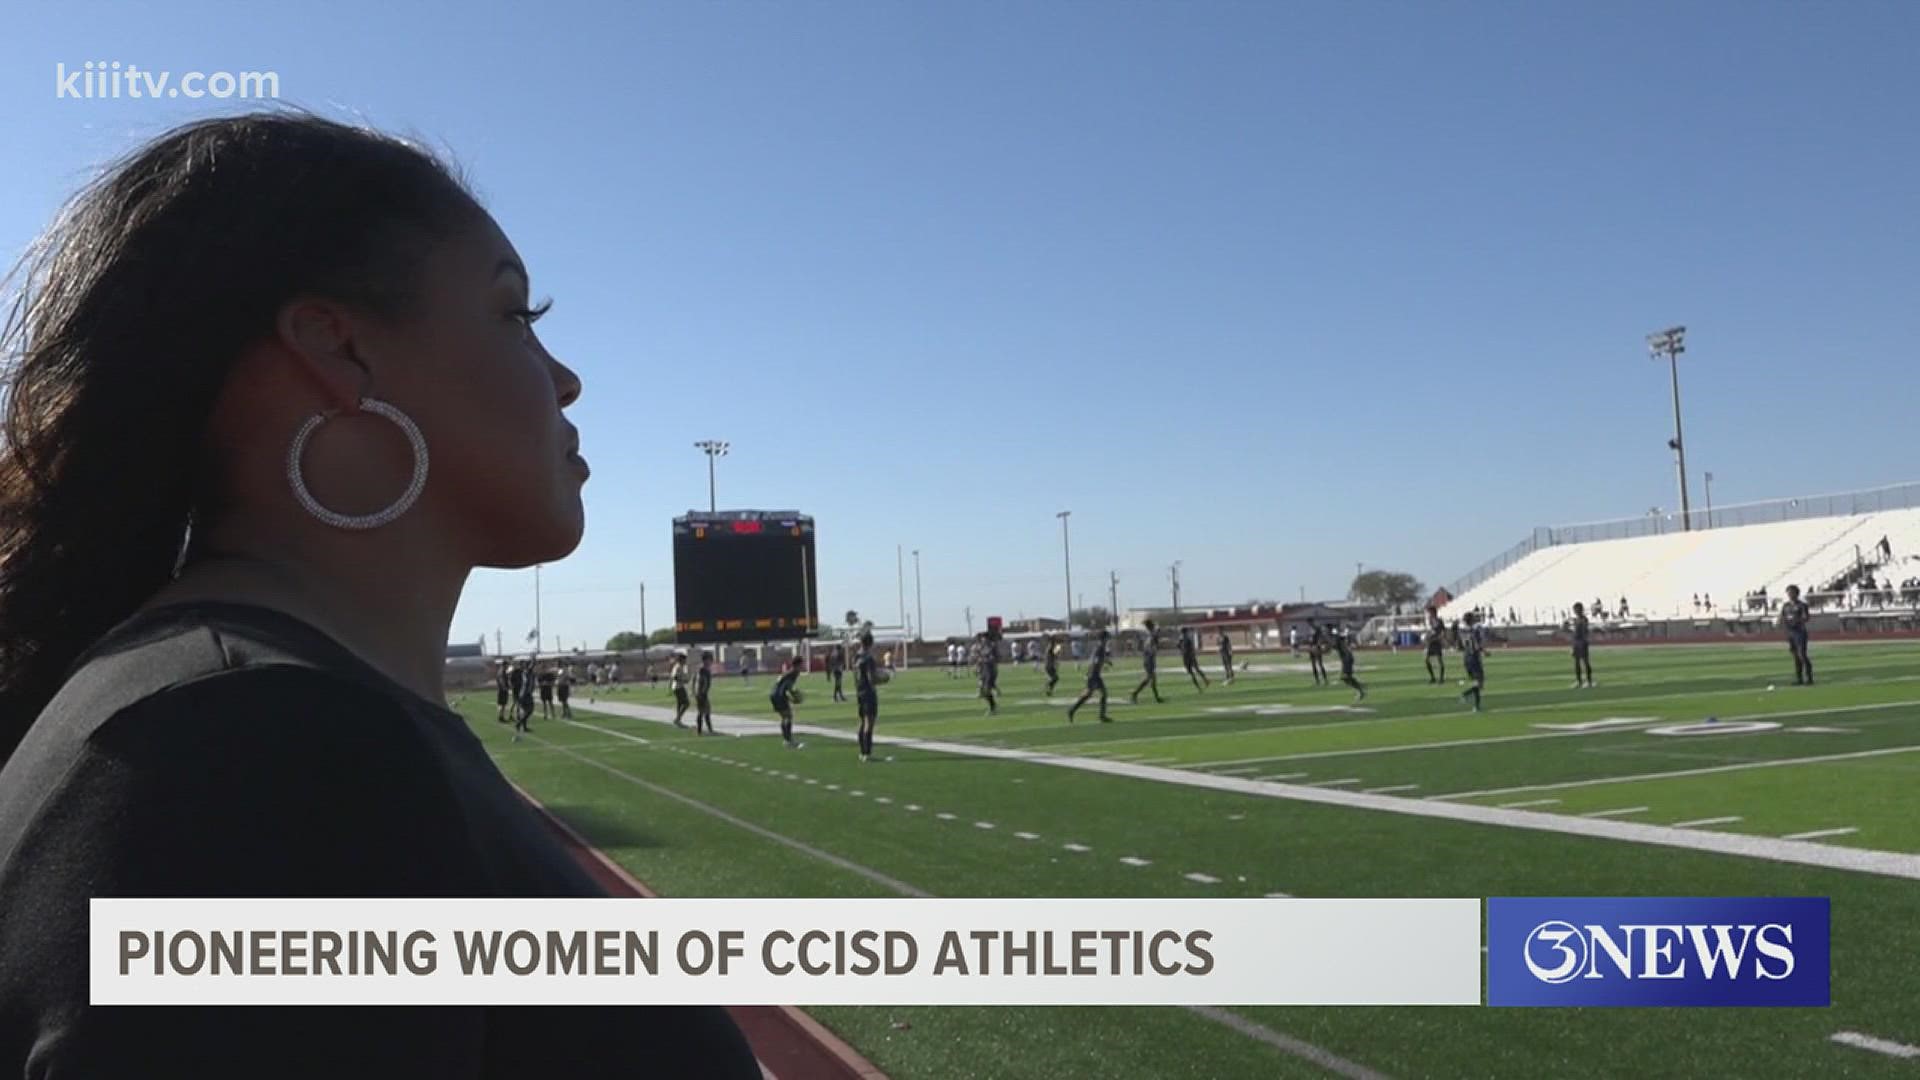 Deelynn is one of several pioneering women with CCISD Athletics. Shaye Carpenter is the latest. She's the first black Assistant Athletic Director for the district.